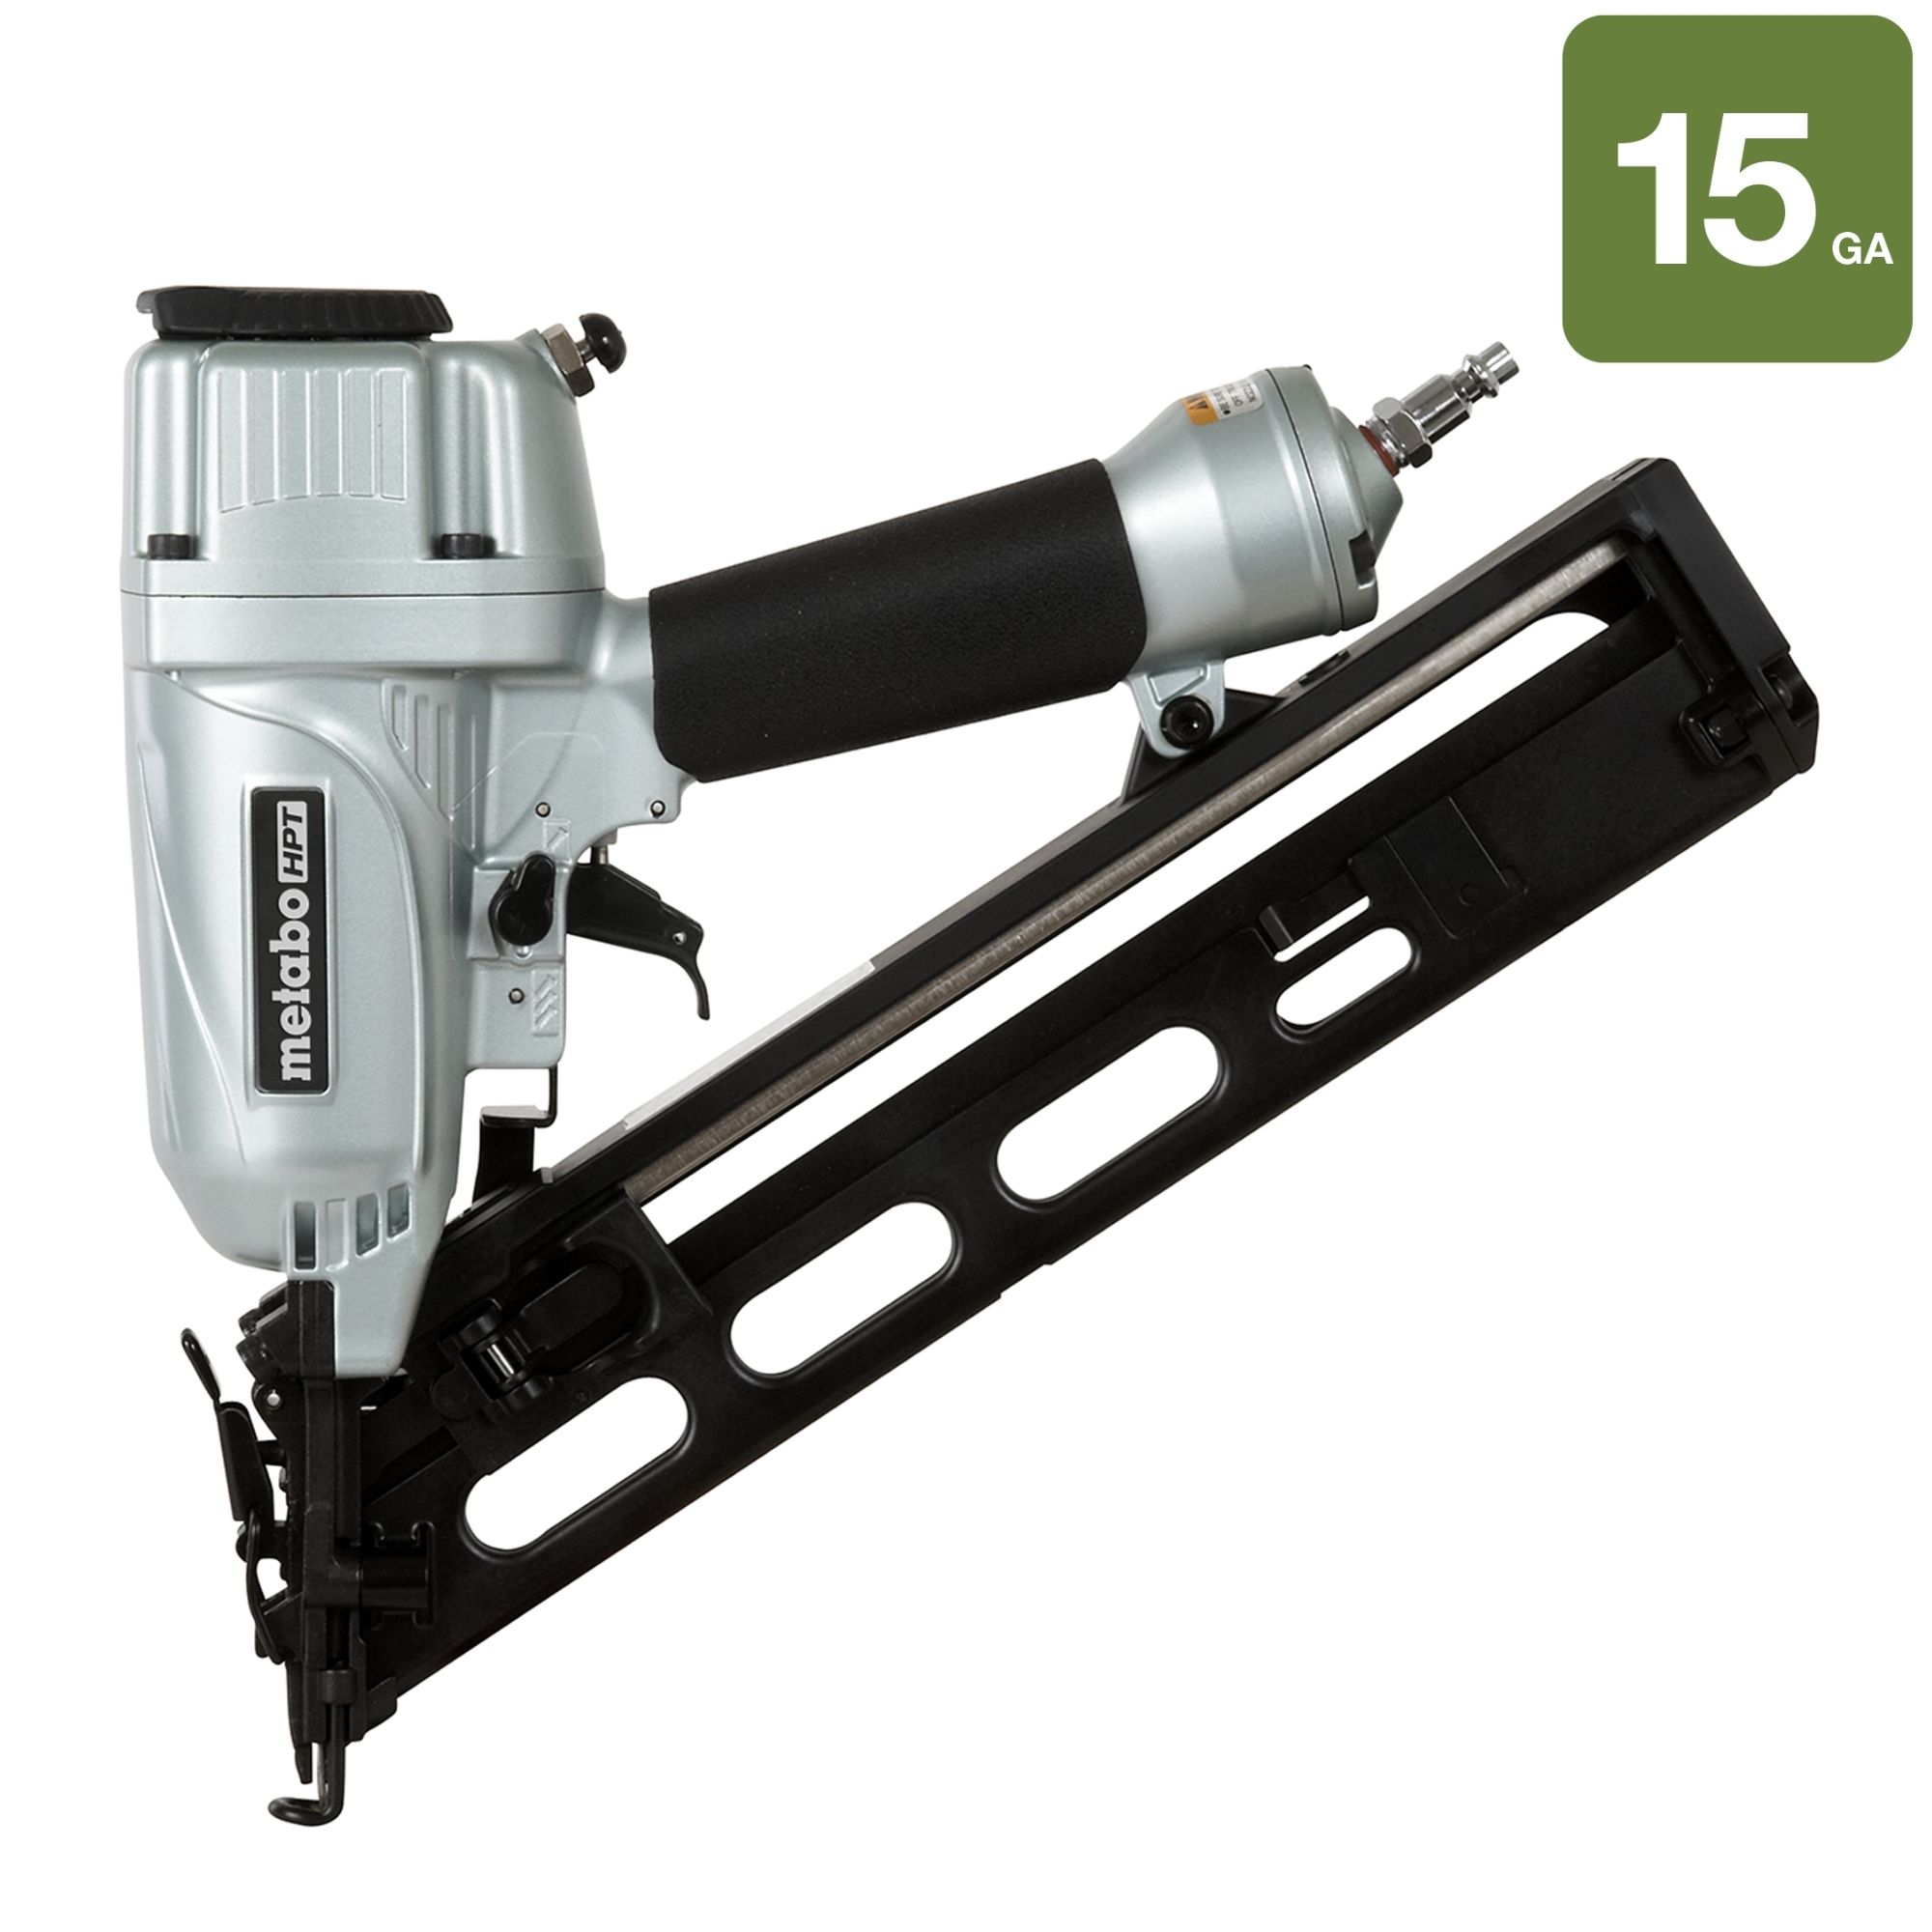 2-1/2 Inch 15 Gauge Angled Finish Nailer with Air Duster | Metabo